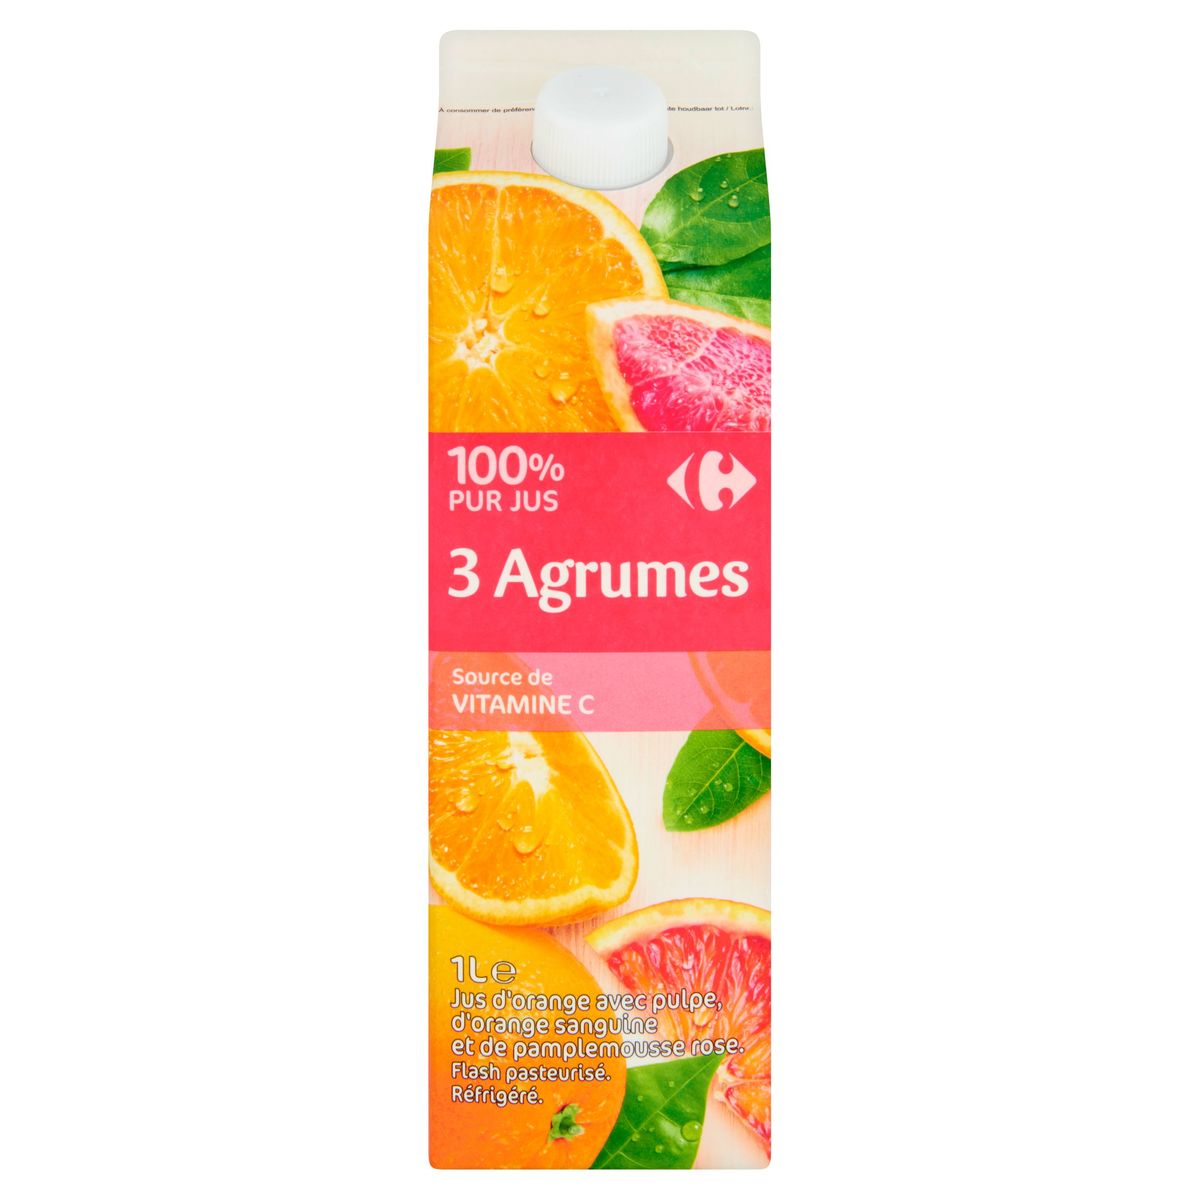 Carrefour 100% Pur Jus 3 Agrumes 1 L